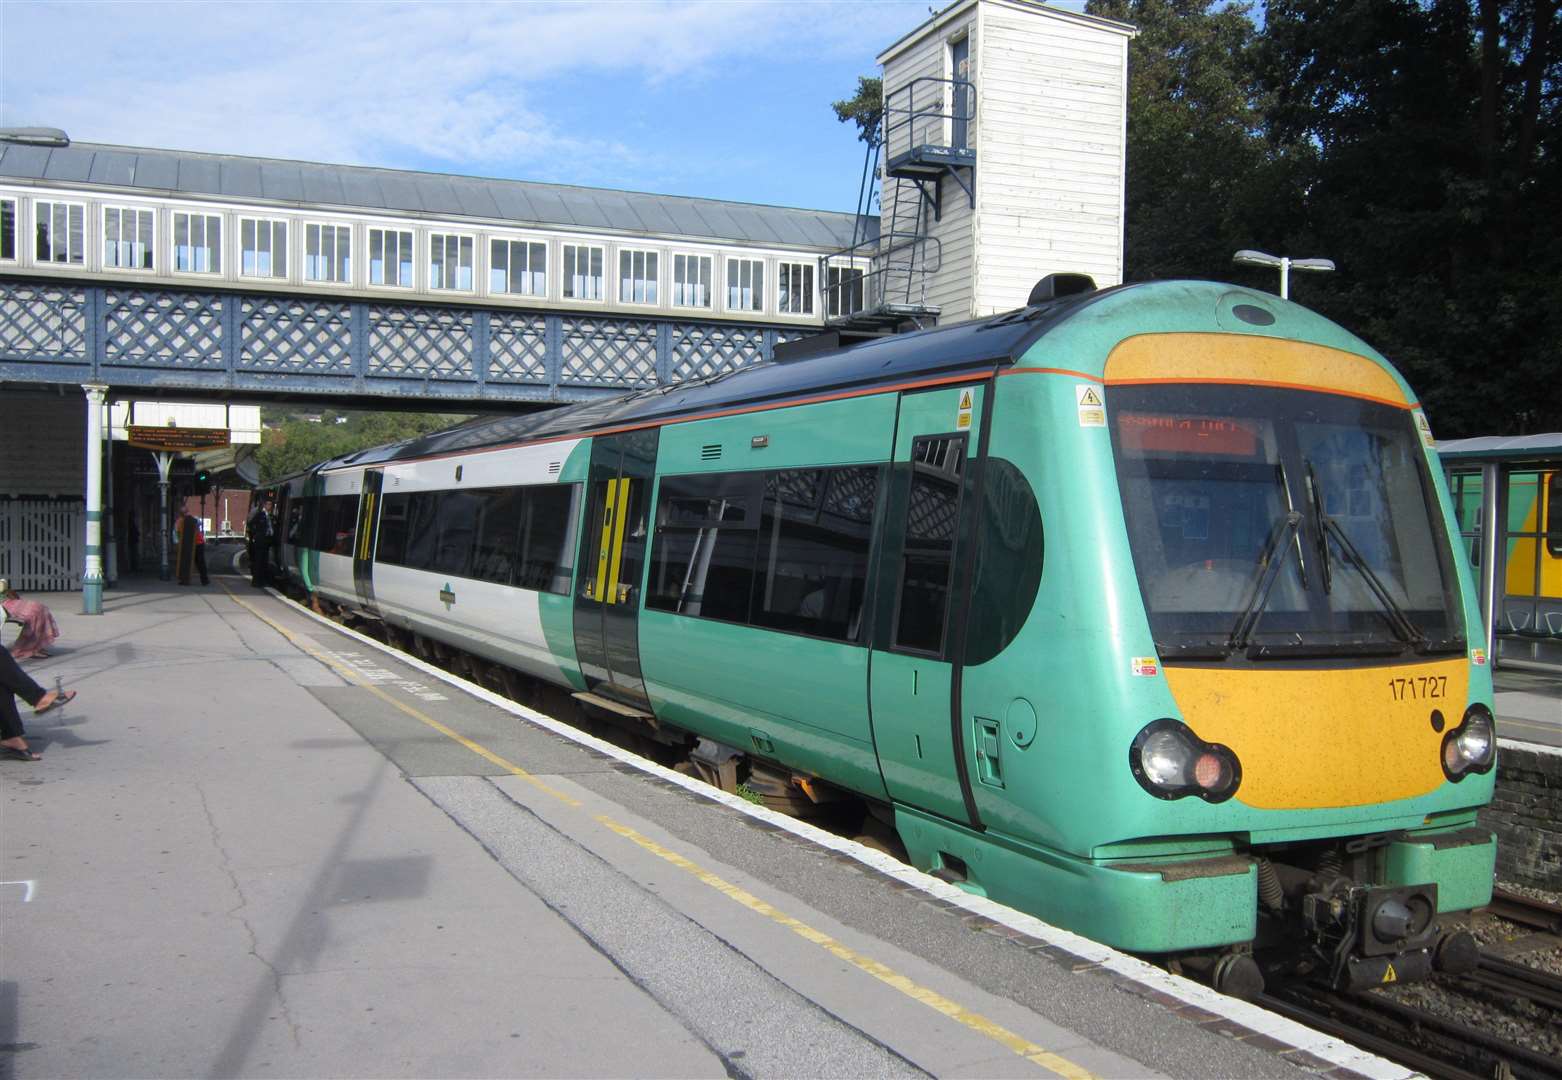 Southern Rail are disrupted after a fault with the signalling system at Streatham Common